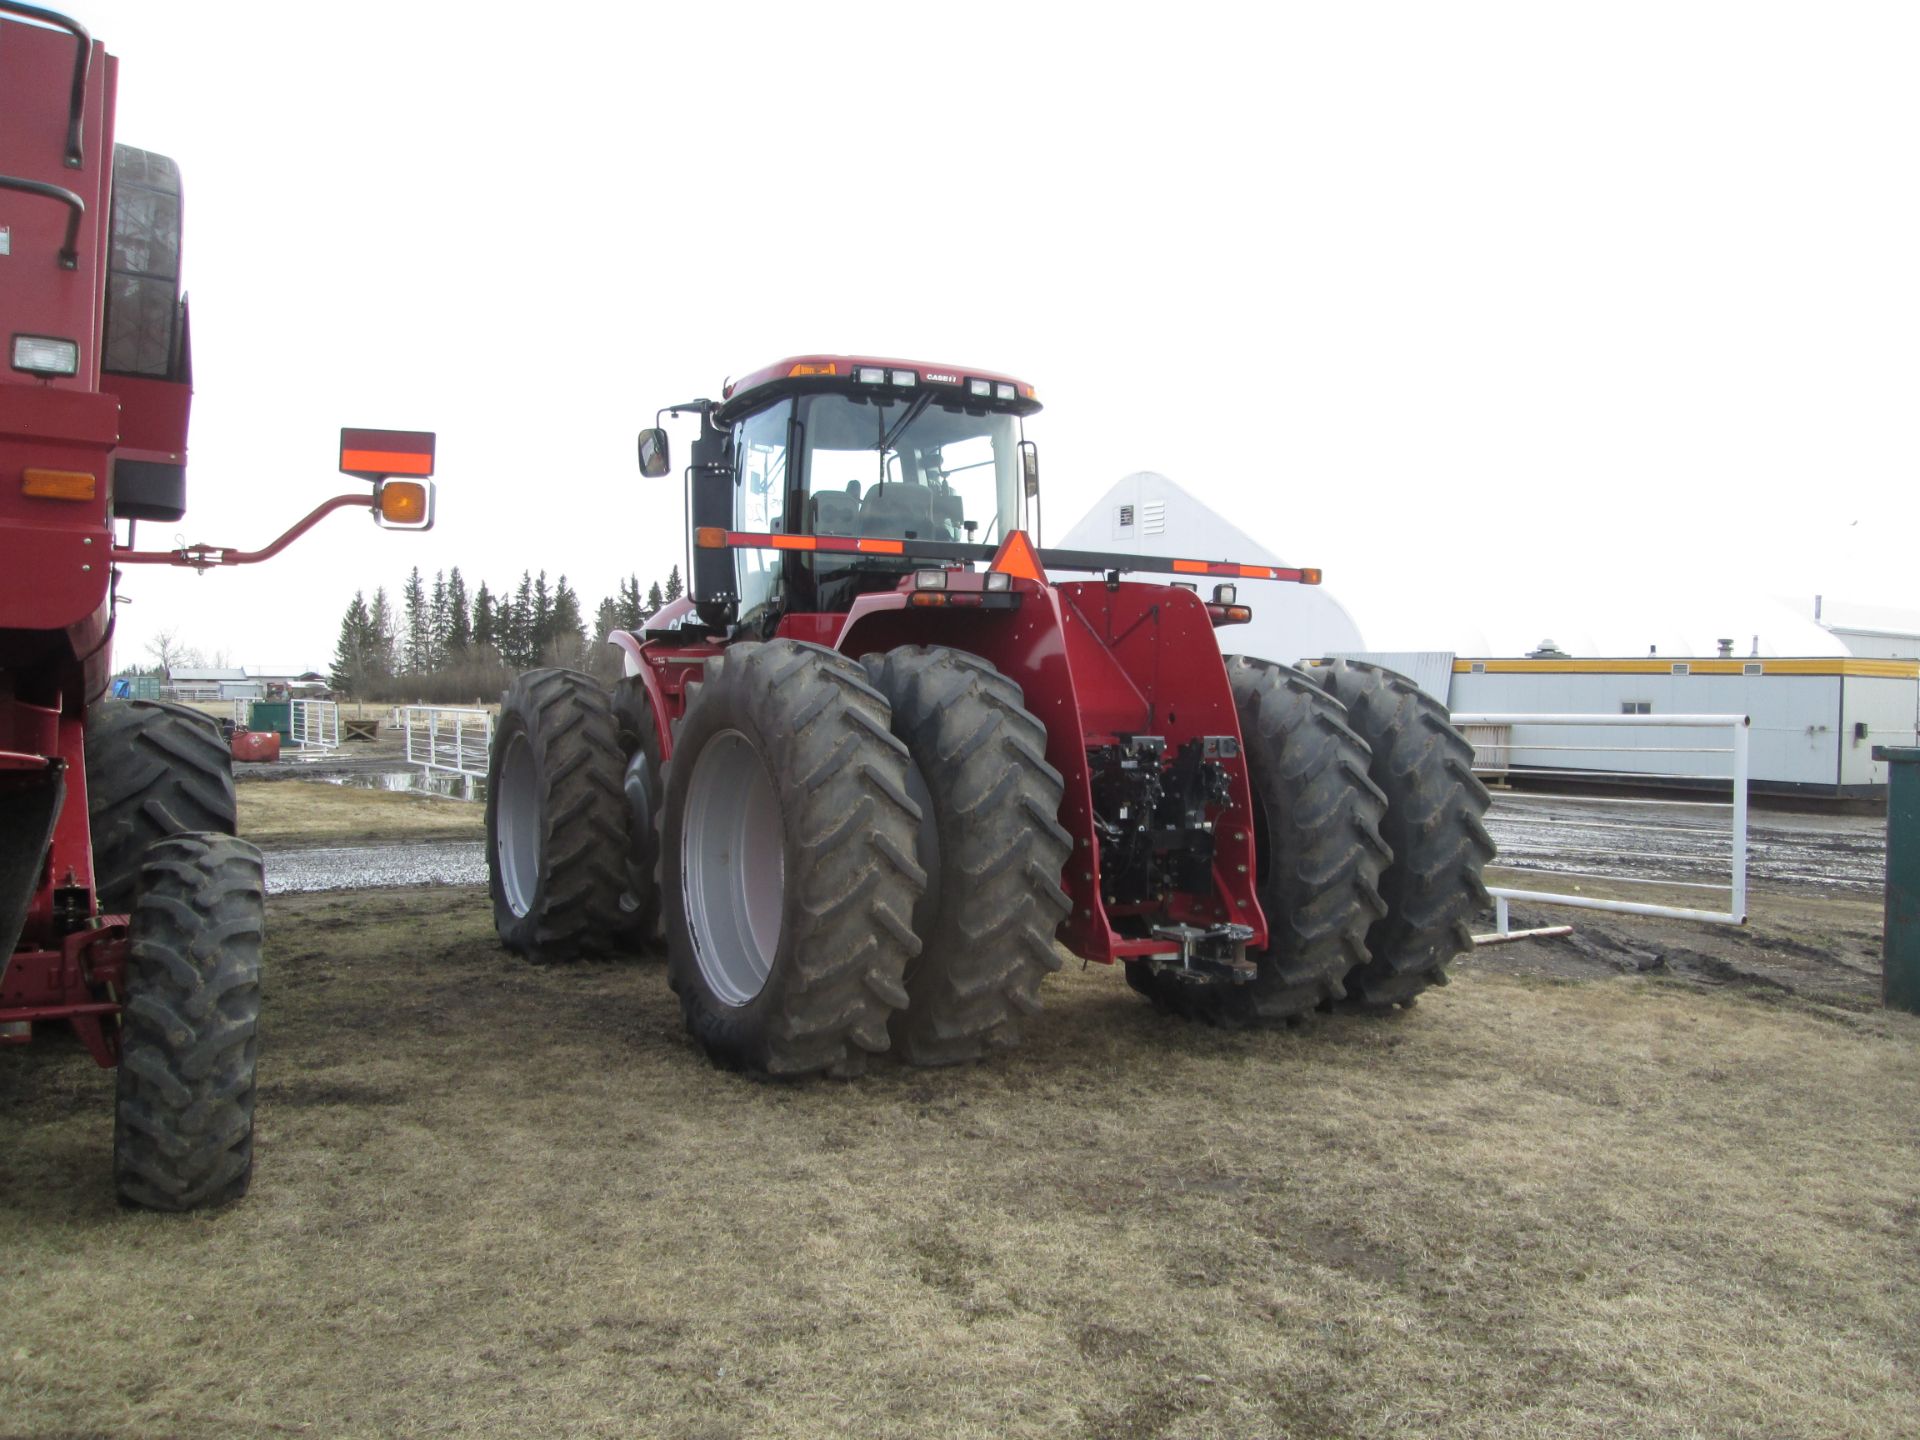 2011 CASE IH Steiger 350 HD 4wd Tractor - Image 9 of 11